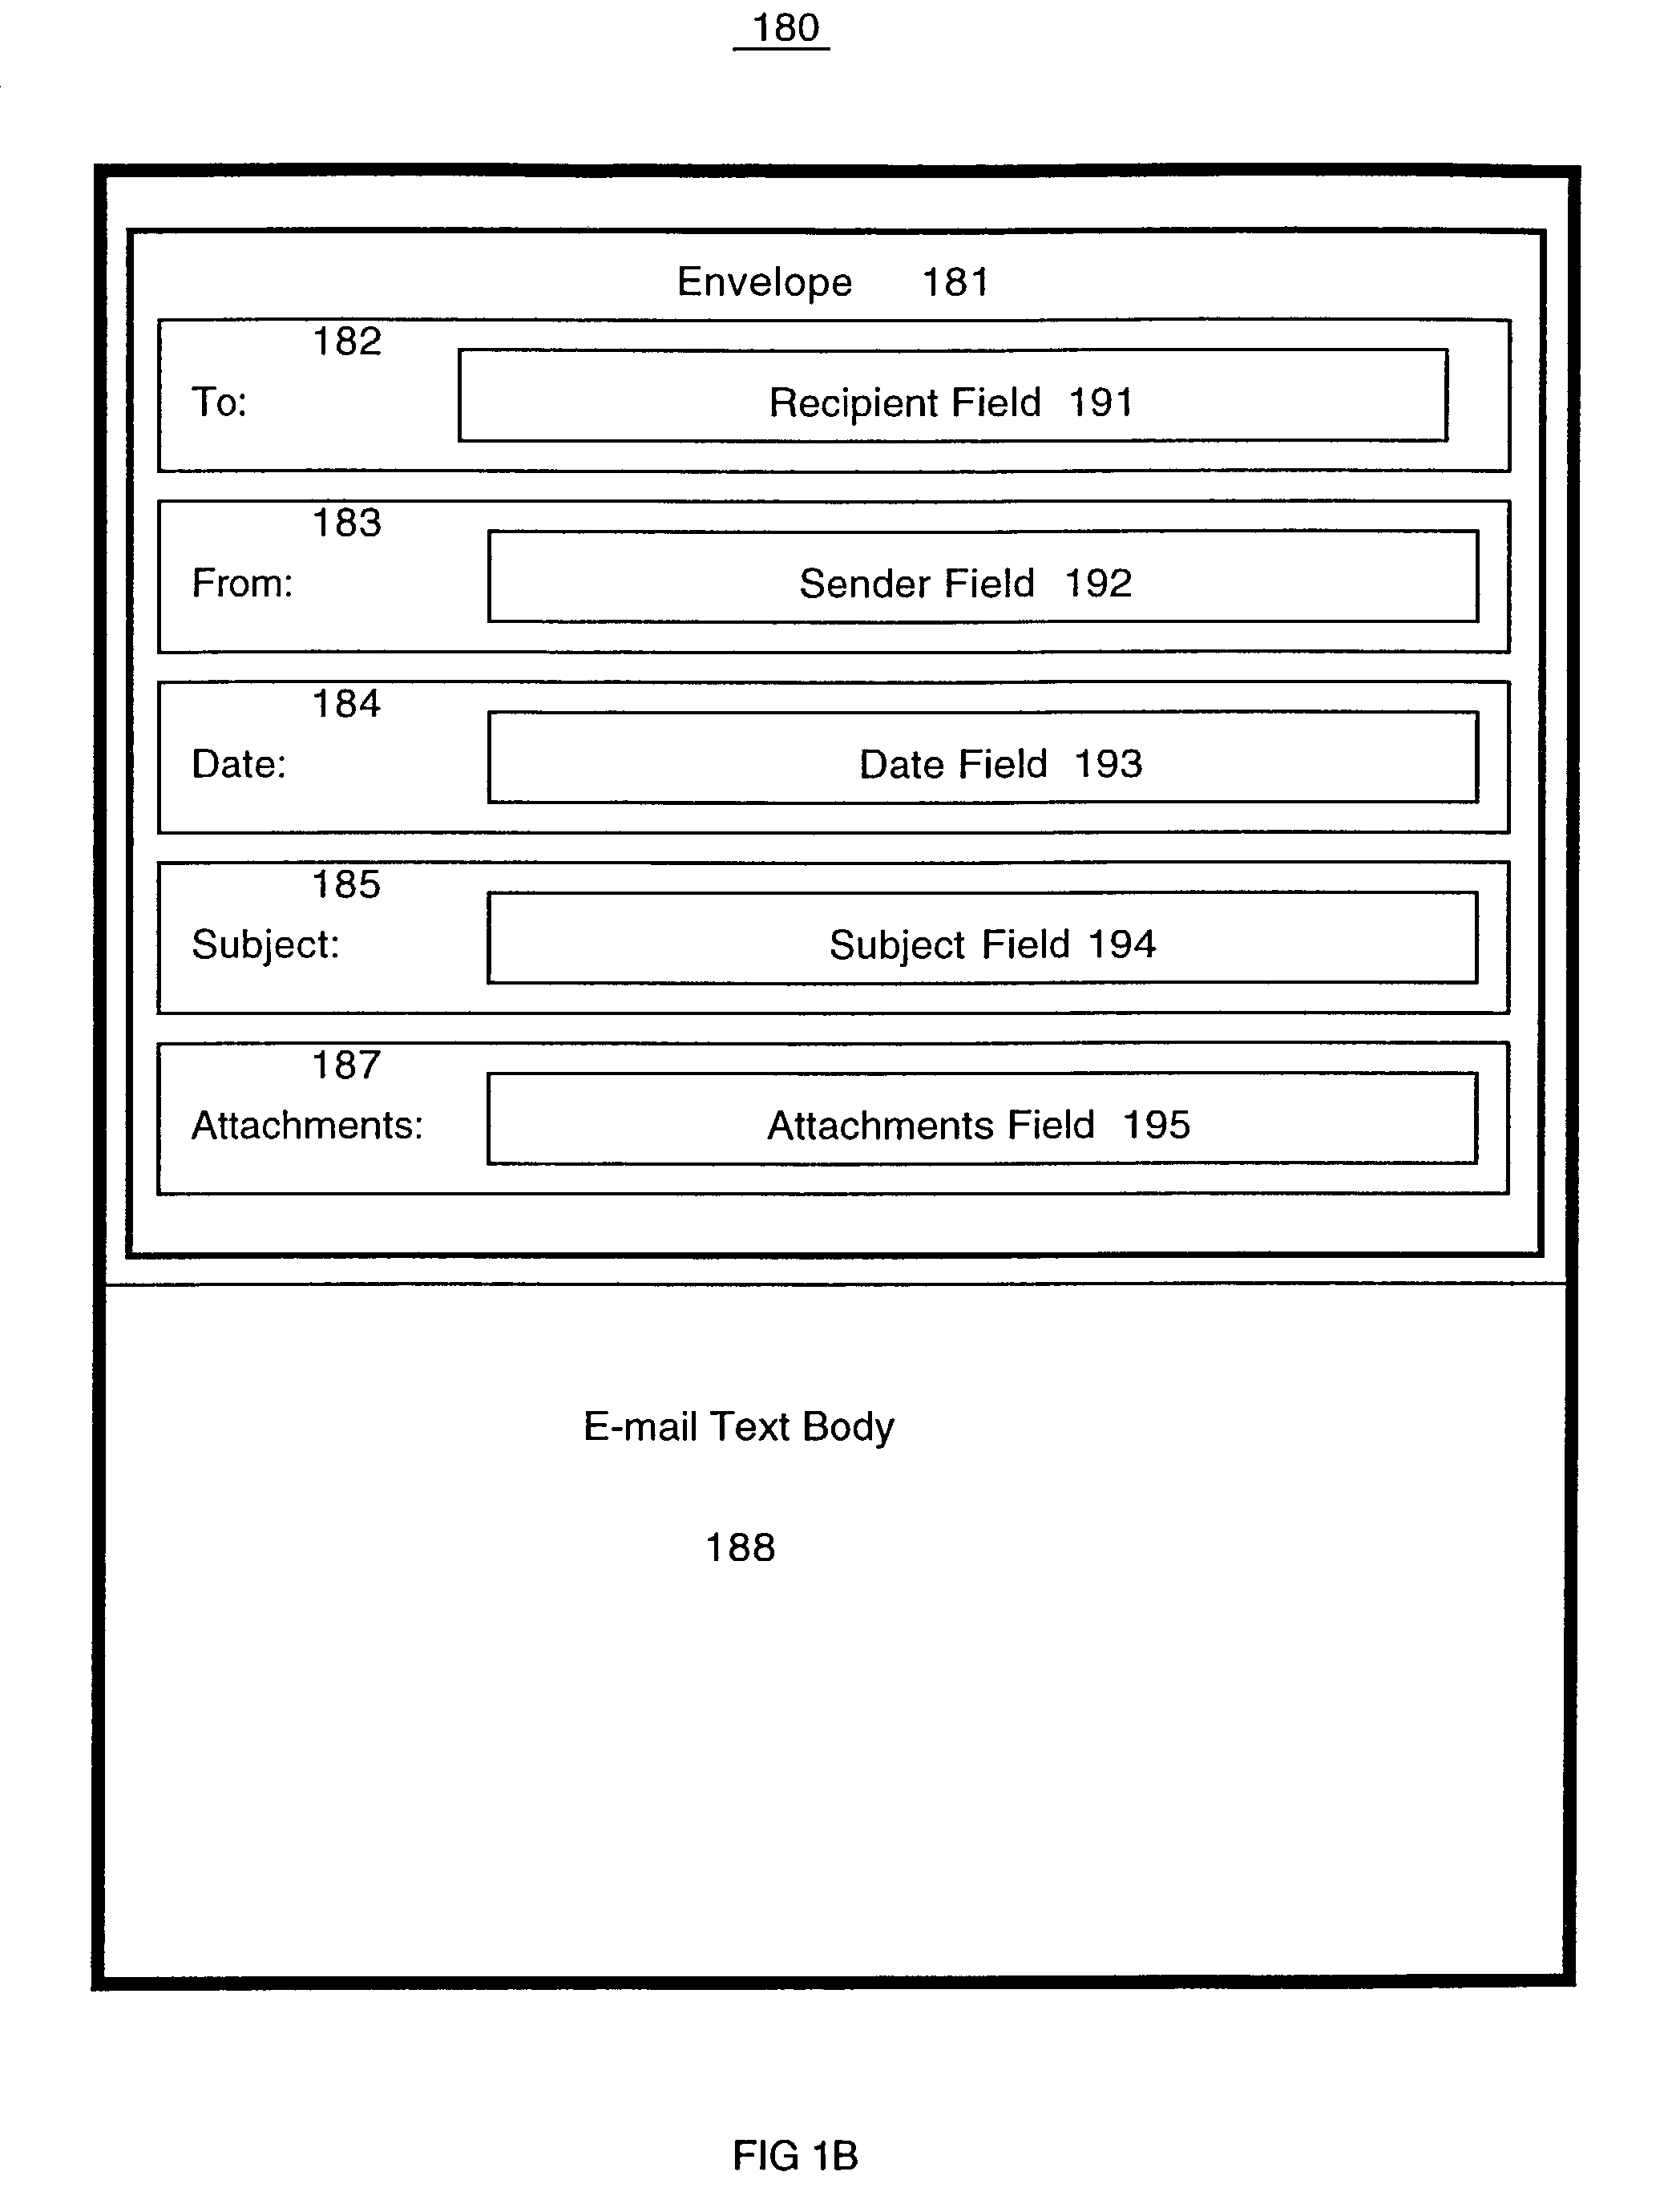 Computer implemented system and method for predictive management of electronic messages